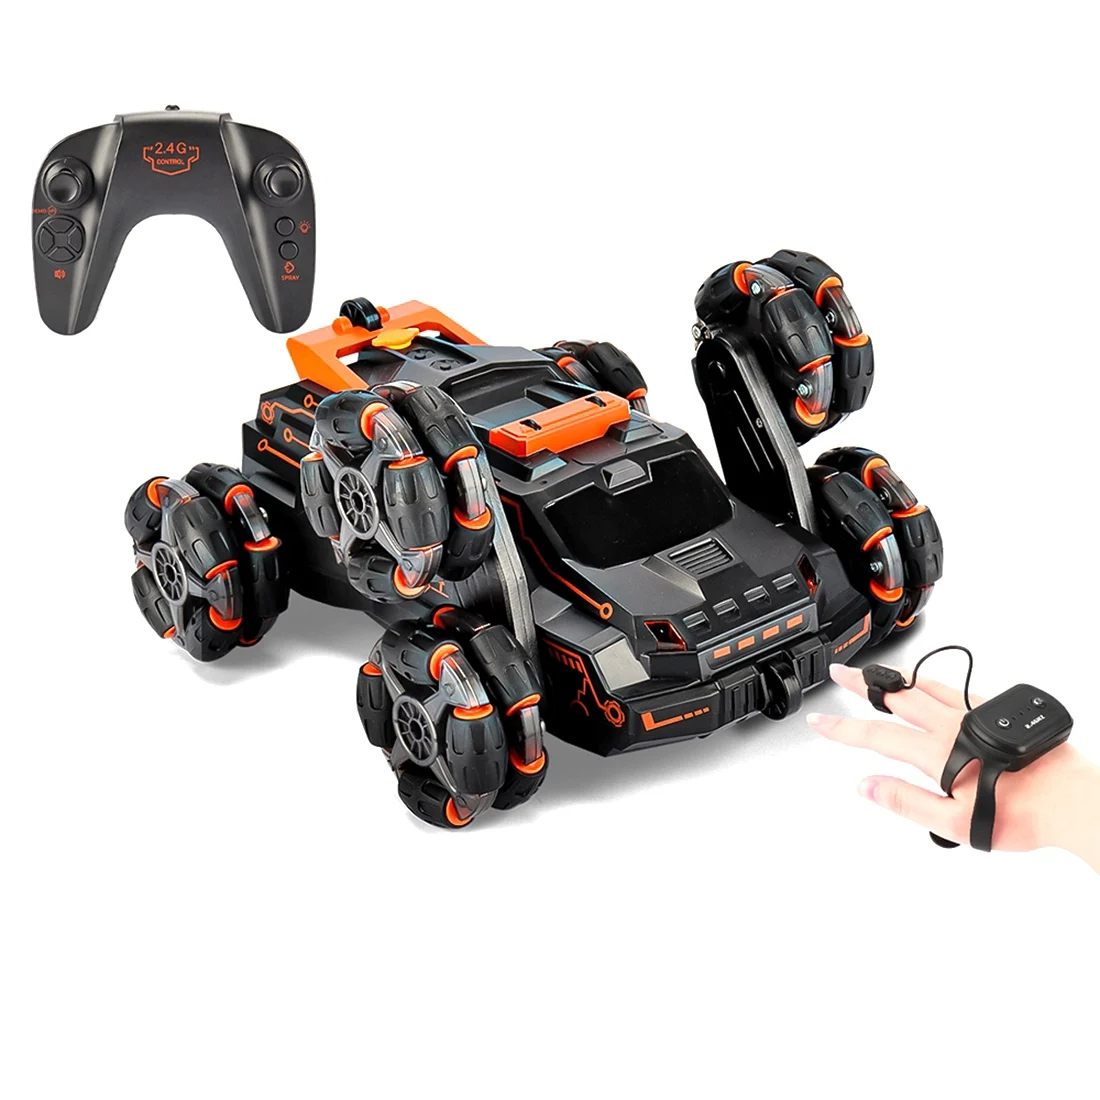 

4Wd RC Car Toy Gesture Sensing Twisting Stunt Drift Car Radio Remote Controlled Cars RC Toys for Kids Adults-Orange